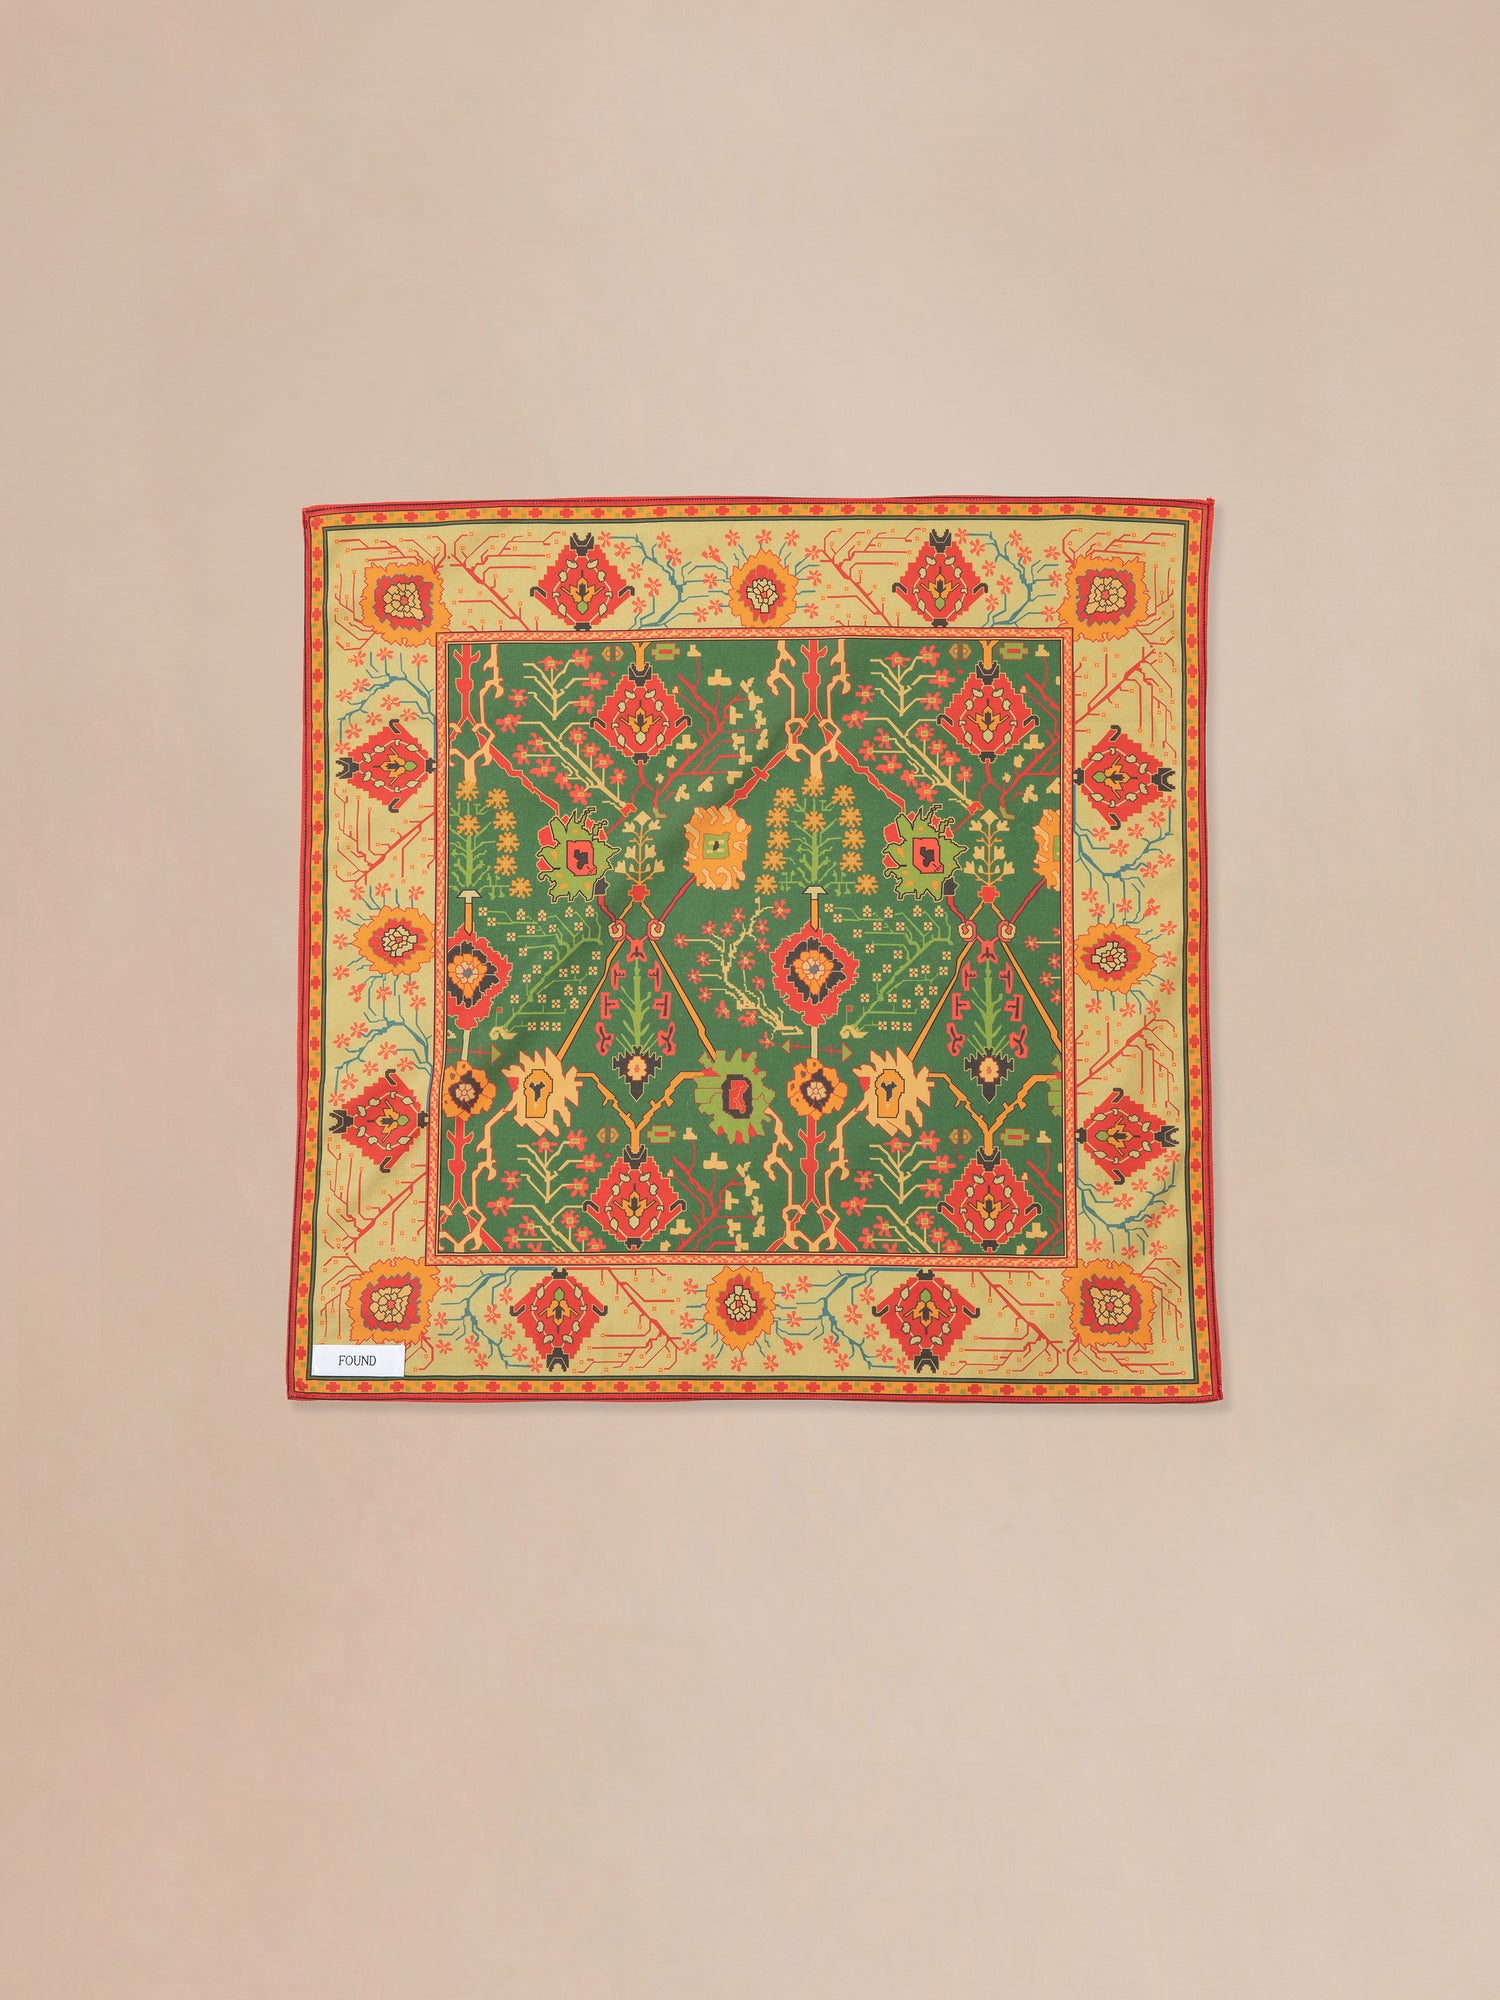 A cotton blend rug with a red and orange Found Botanical Mosaic Bandana design.